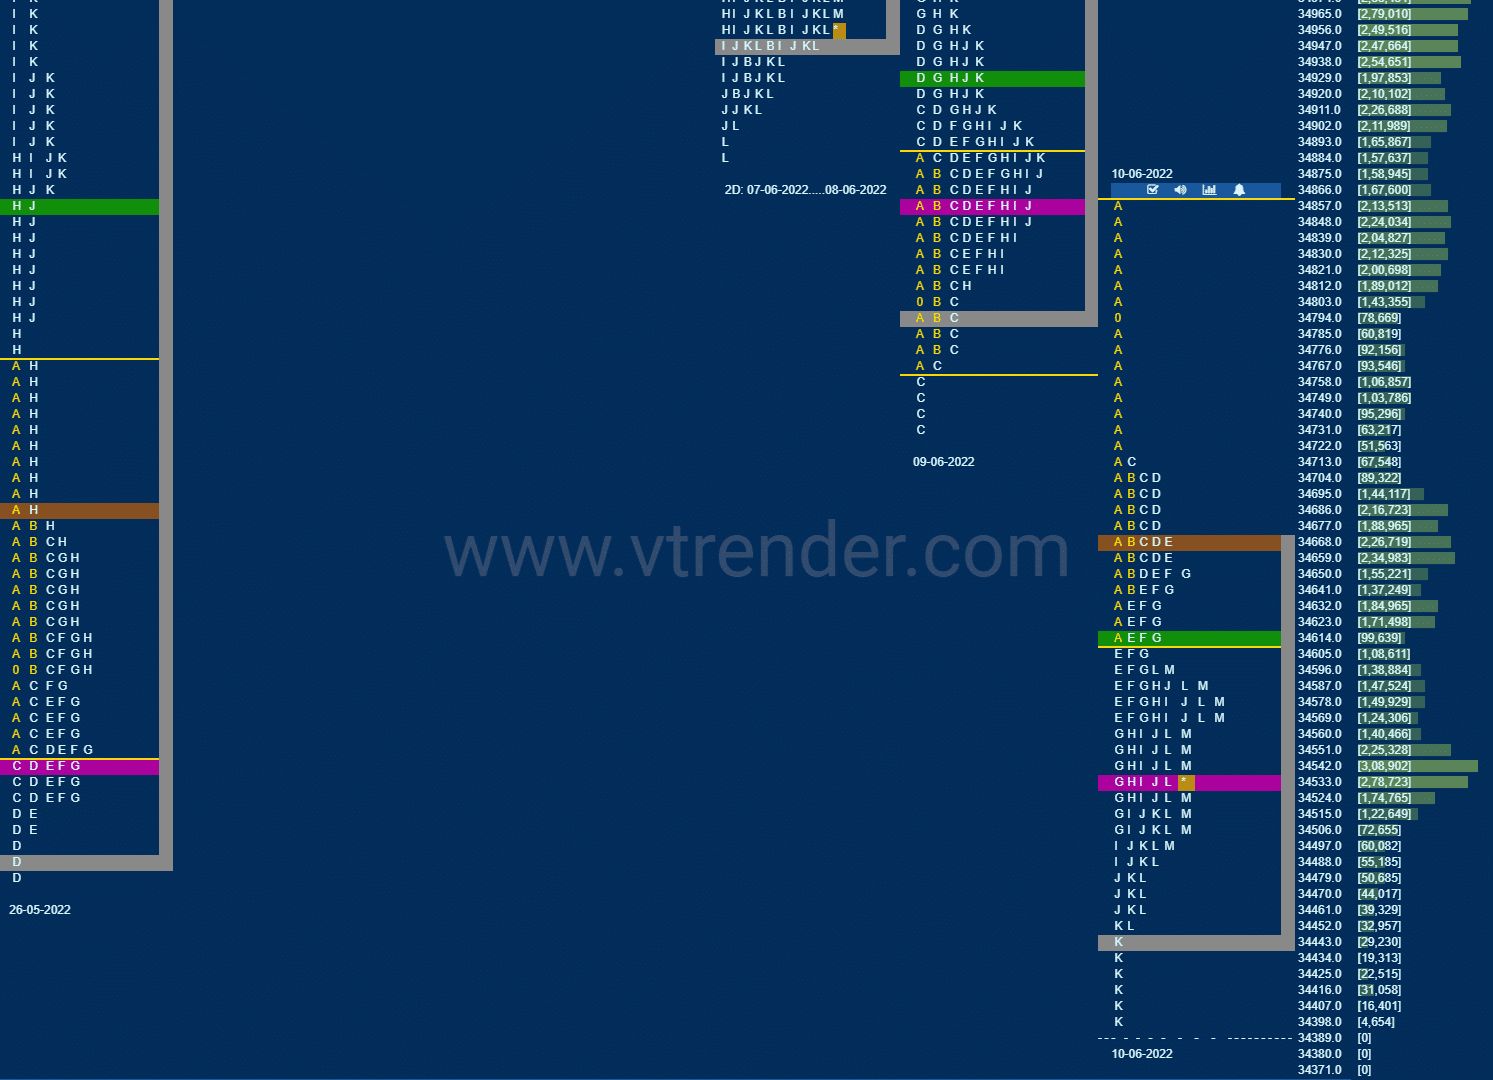 Bnf 8 Market Profile Analysis Dated 10Th Jun 2022 Banknifty Futures, Charts, Day Trading, Intraday Trading, Intraday Trading Strategies, Market Profile, Market Profile Trading Strategies, Nifty Futures, Order Flow Analysis, Support And Resistance, Technical Analysis, Trading Strategies, Volume Profile Trading